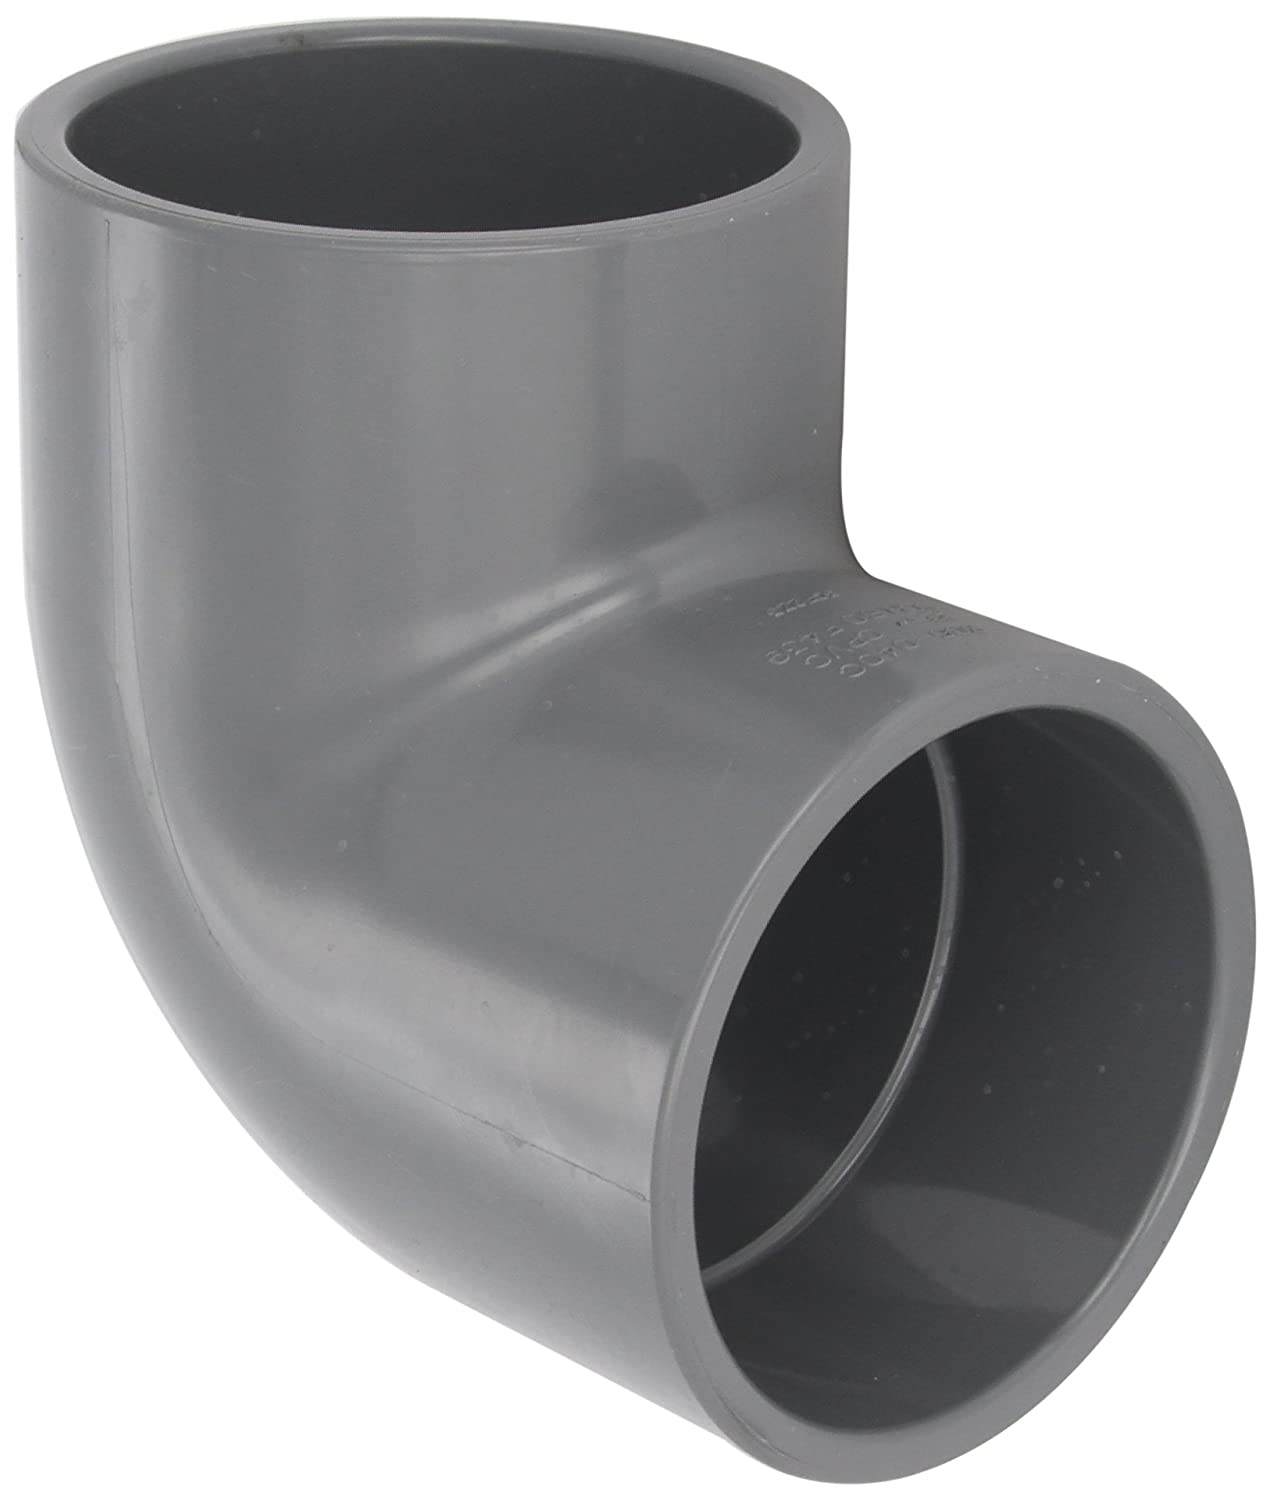 Spears Manufacturing, Spears 806-005C - CPVC Pipe Fitting, 90 Degree Elbow, Schedule 80, 1/2" Socket